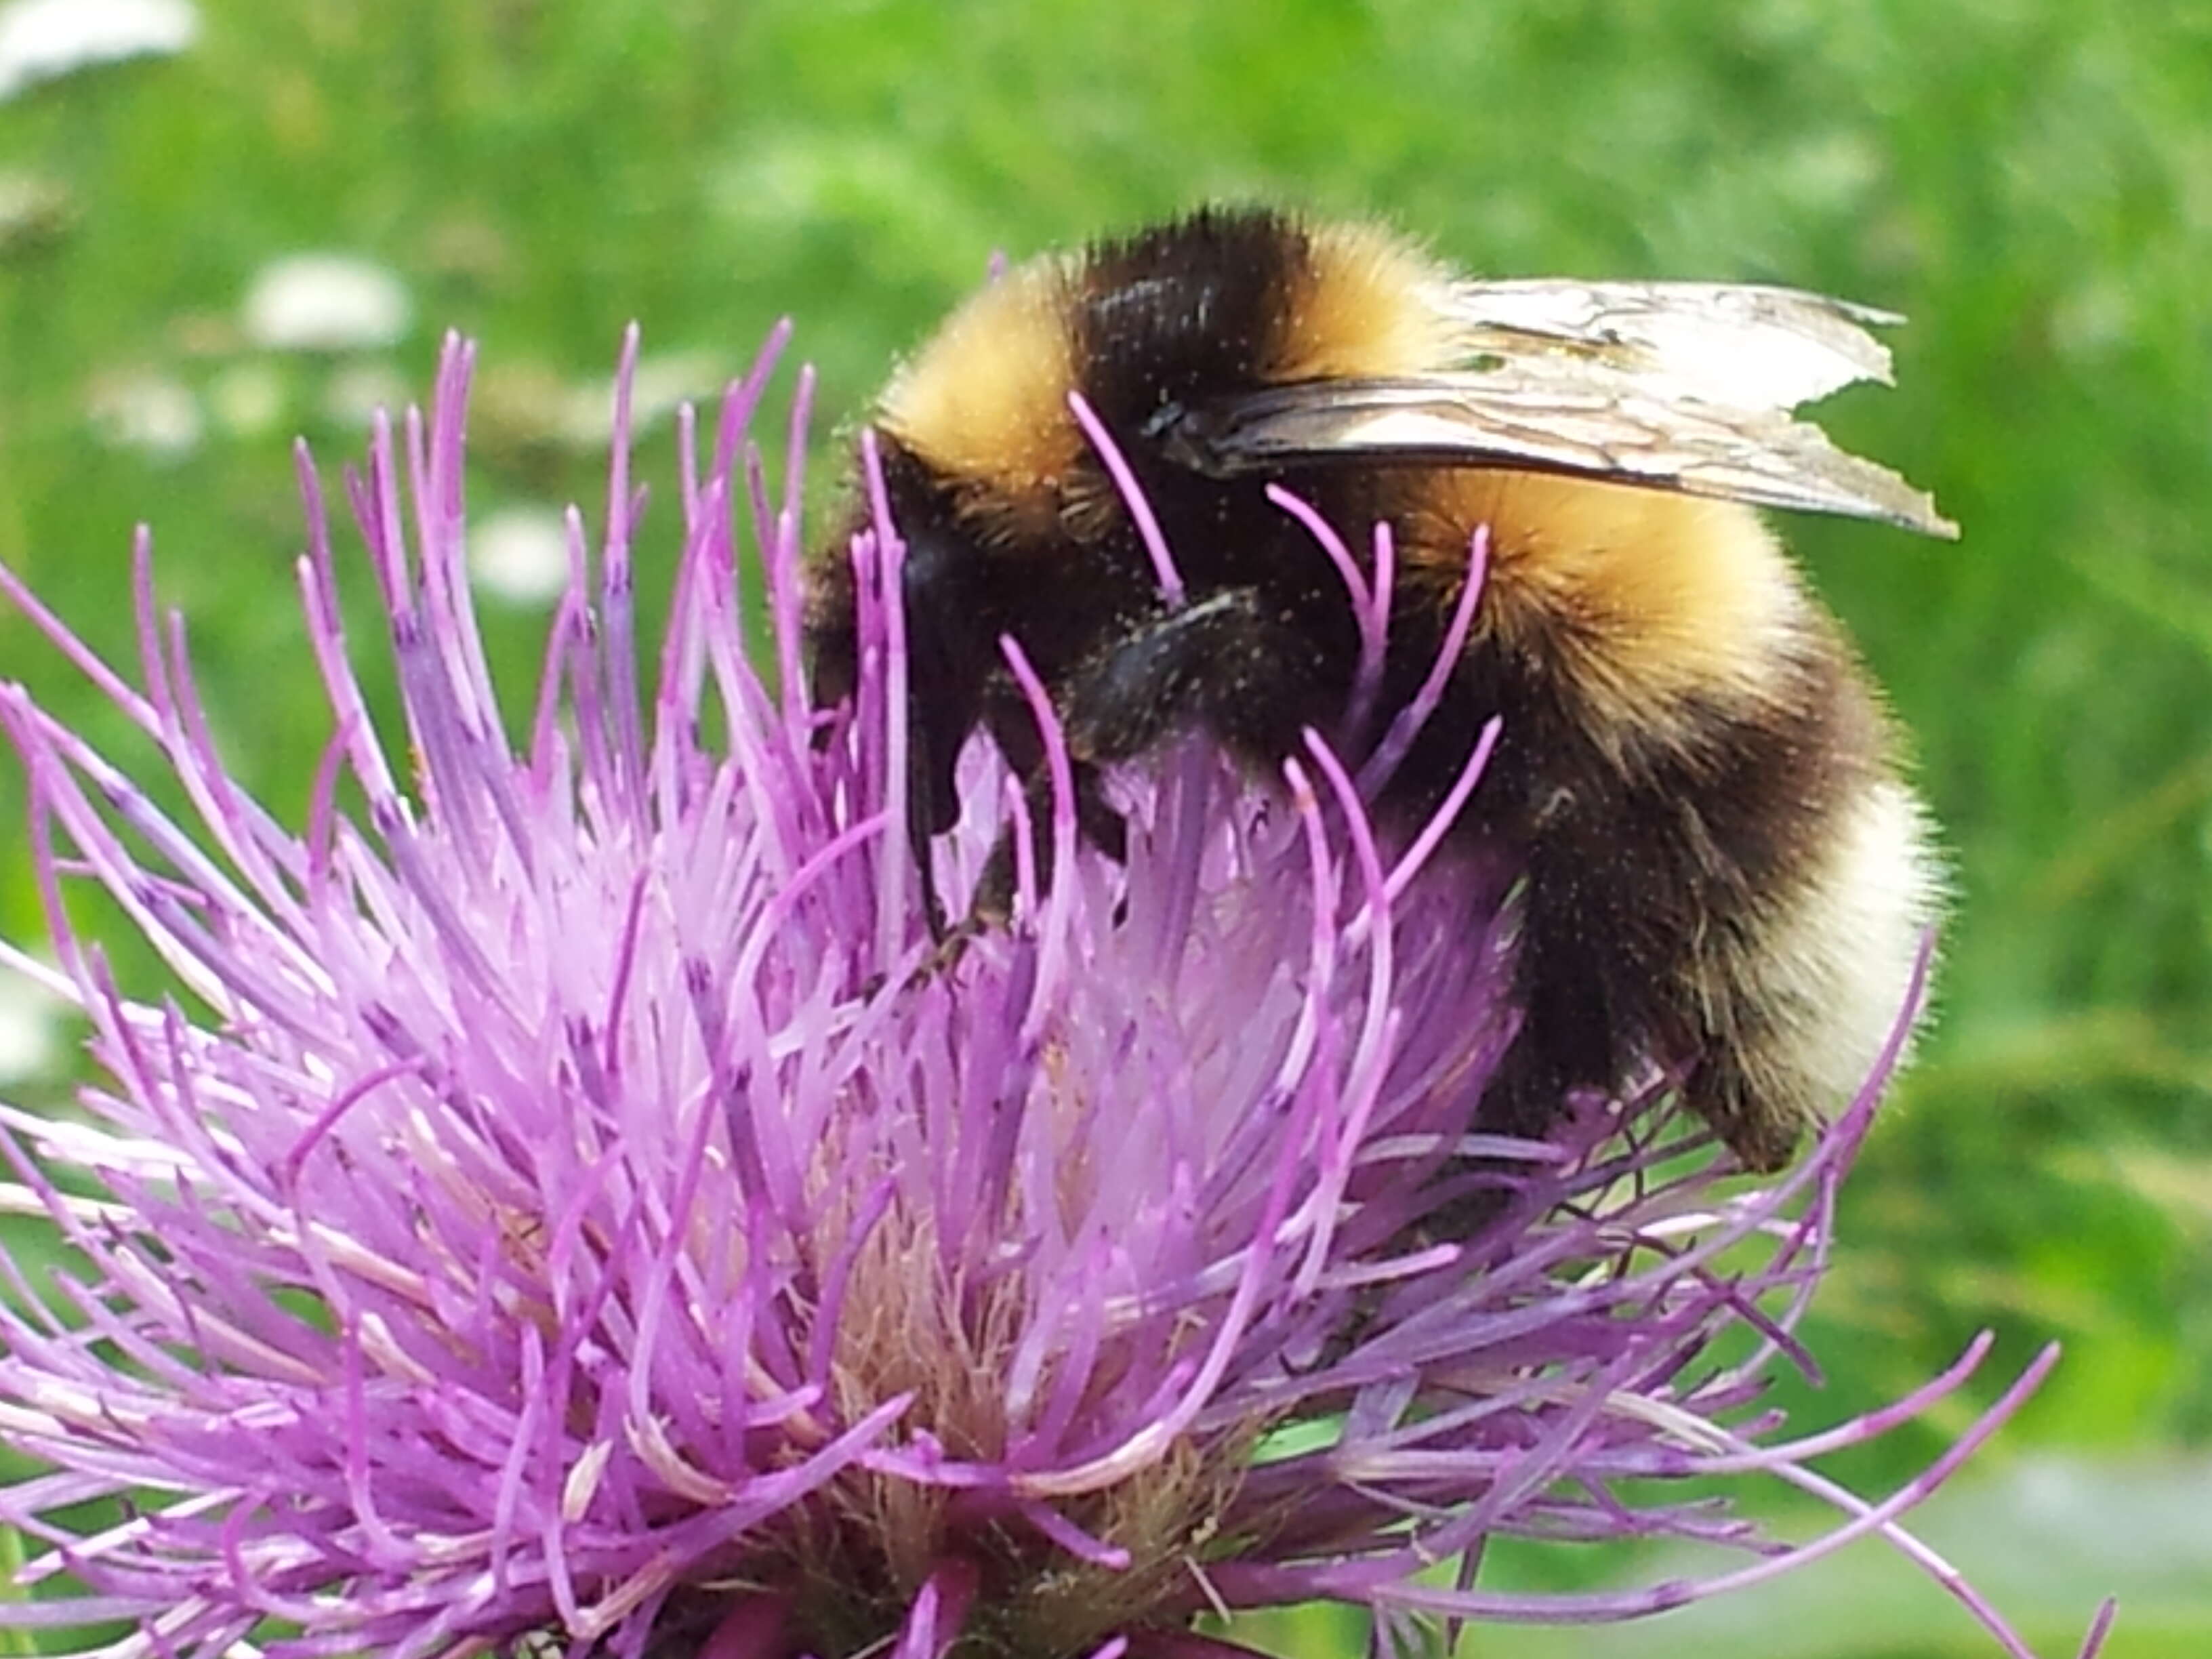 Image of Golden-belted Bumble Bee